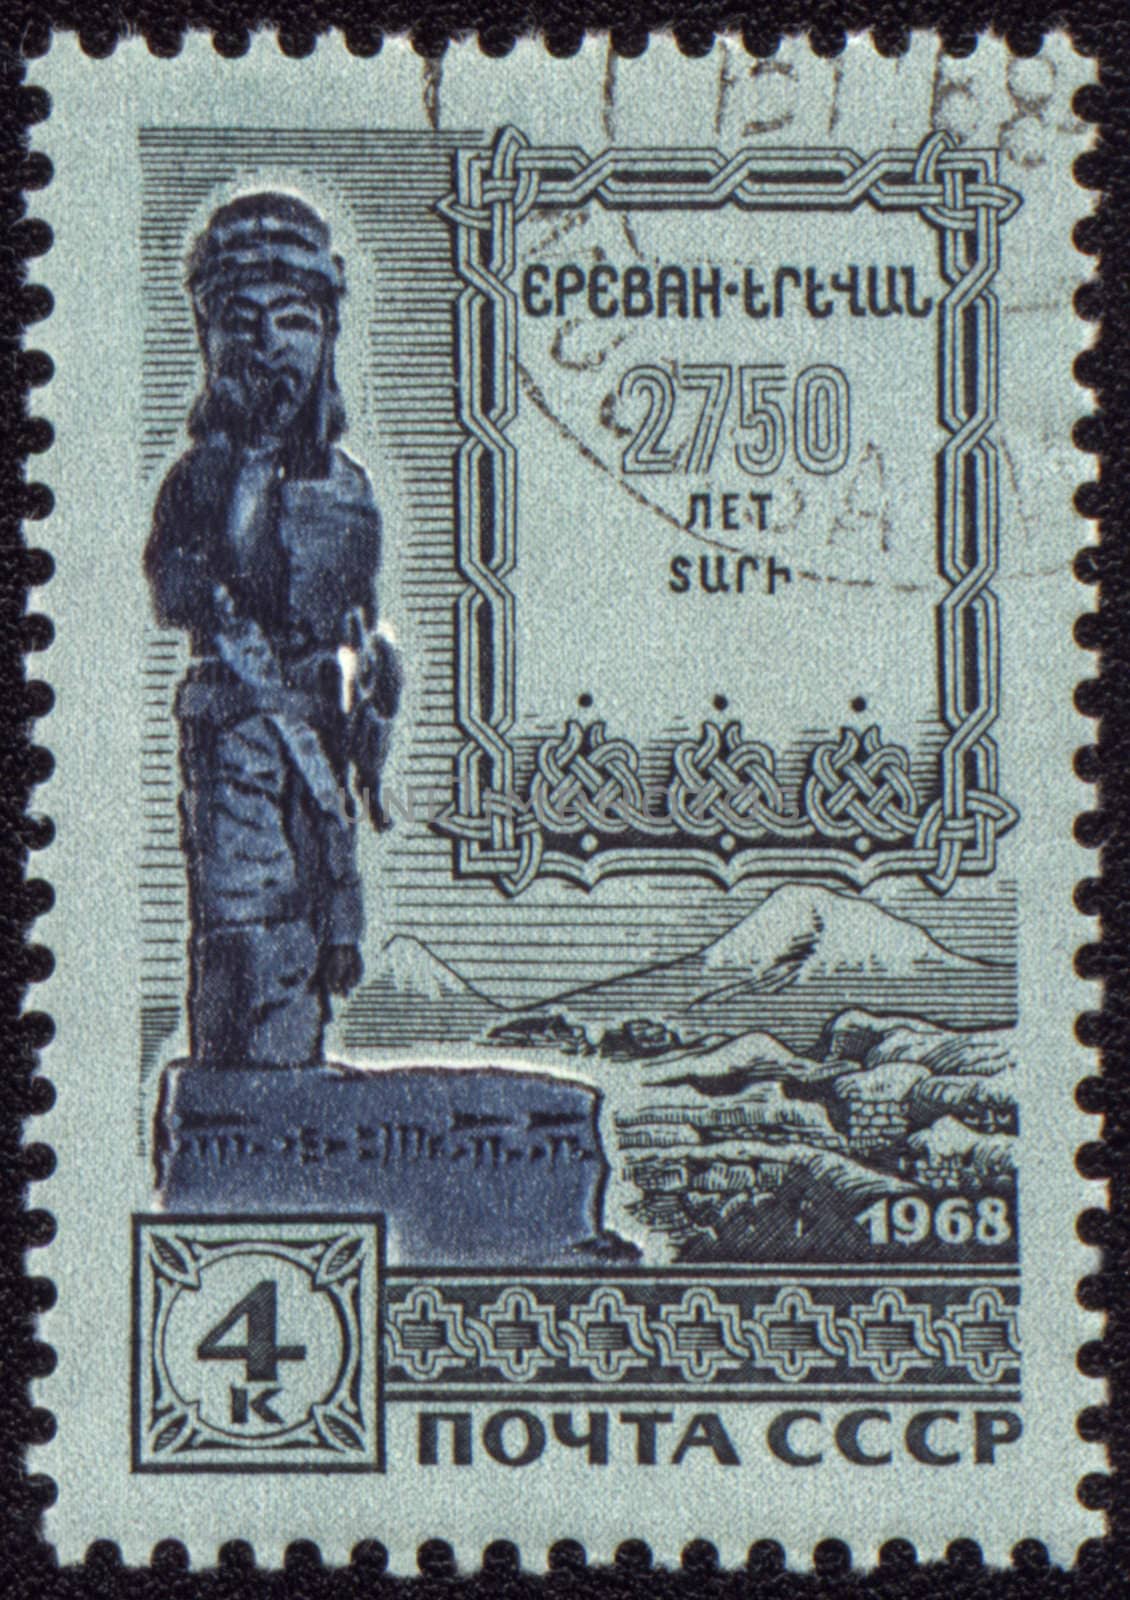 USSR - CIRCA 1968: stamp printed in USSR shows ancient statue devoted 2750 anniversary of Yerevan, capital of Armenia, circa 1968